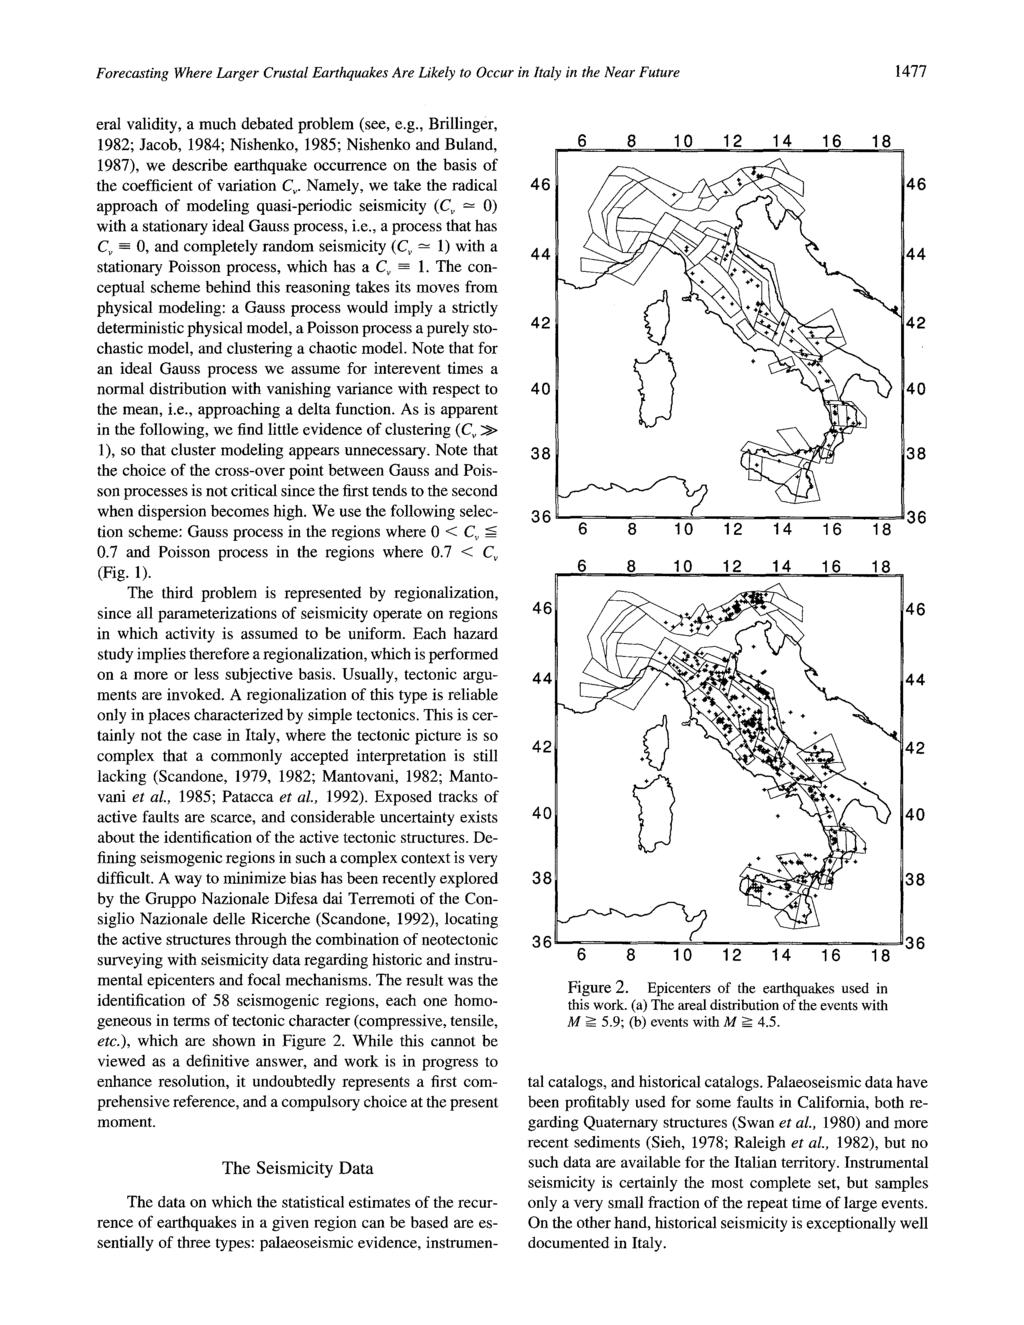 Forecasting Where Larger Crustal Earthquakes Are Likely to Occur in Italy in the Near Future 1477 eral validity, a much debated problem (see, e.g., Brillinger, 1982; Jacob, 1984; Nishenko, 1985; Nishenko and Buland, 1987), we describe earthquake occurrence on the basis of the coefficient of variation Cv.